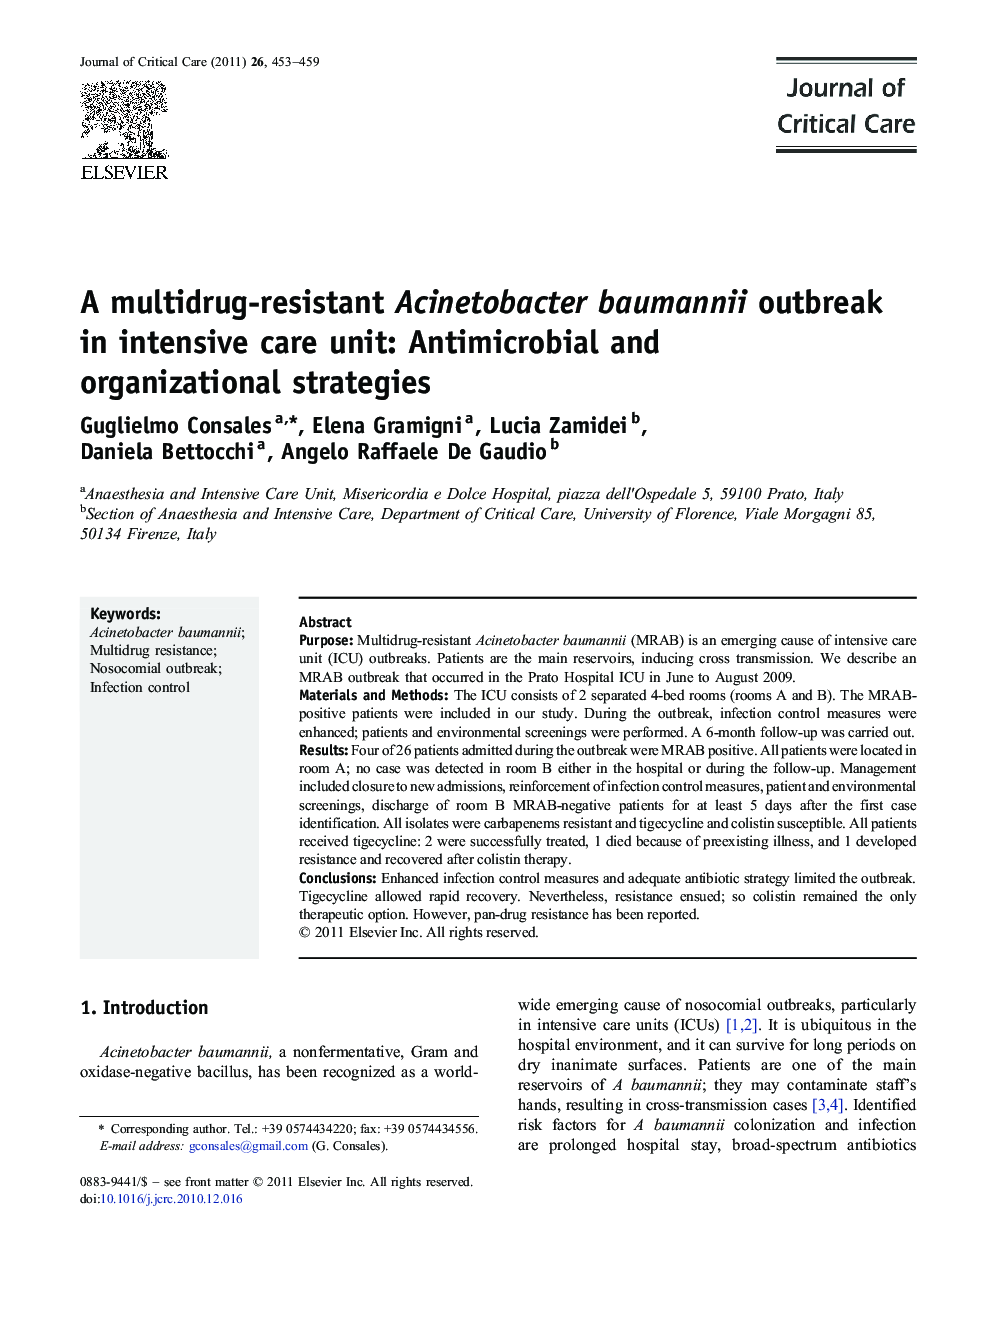 A multidrug-resistant Acinetobacter baumannii outbreak in intensive care unit: Antimicrobial and organizational strategies